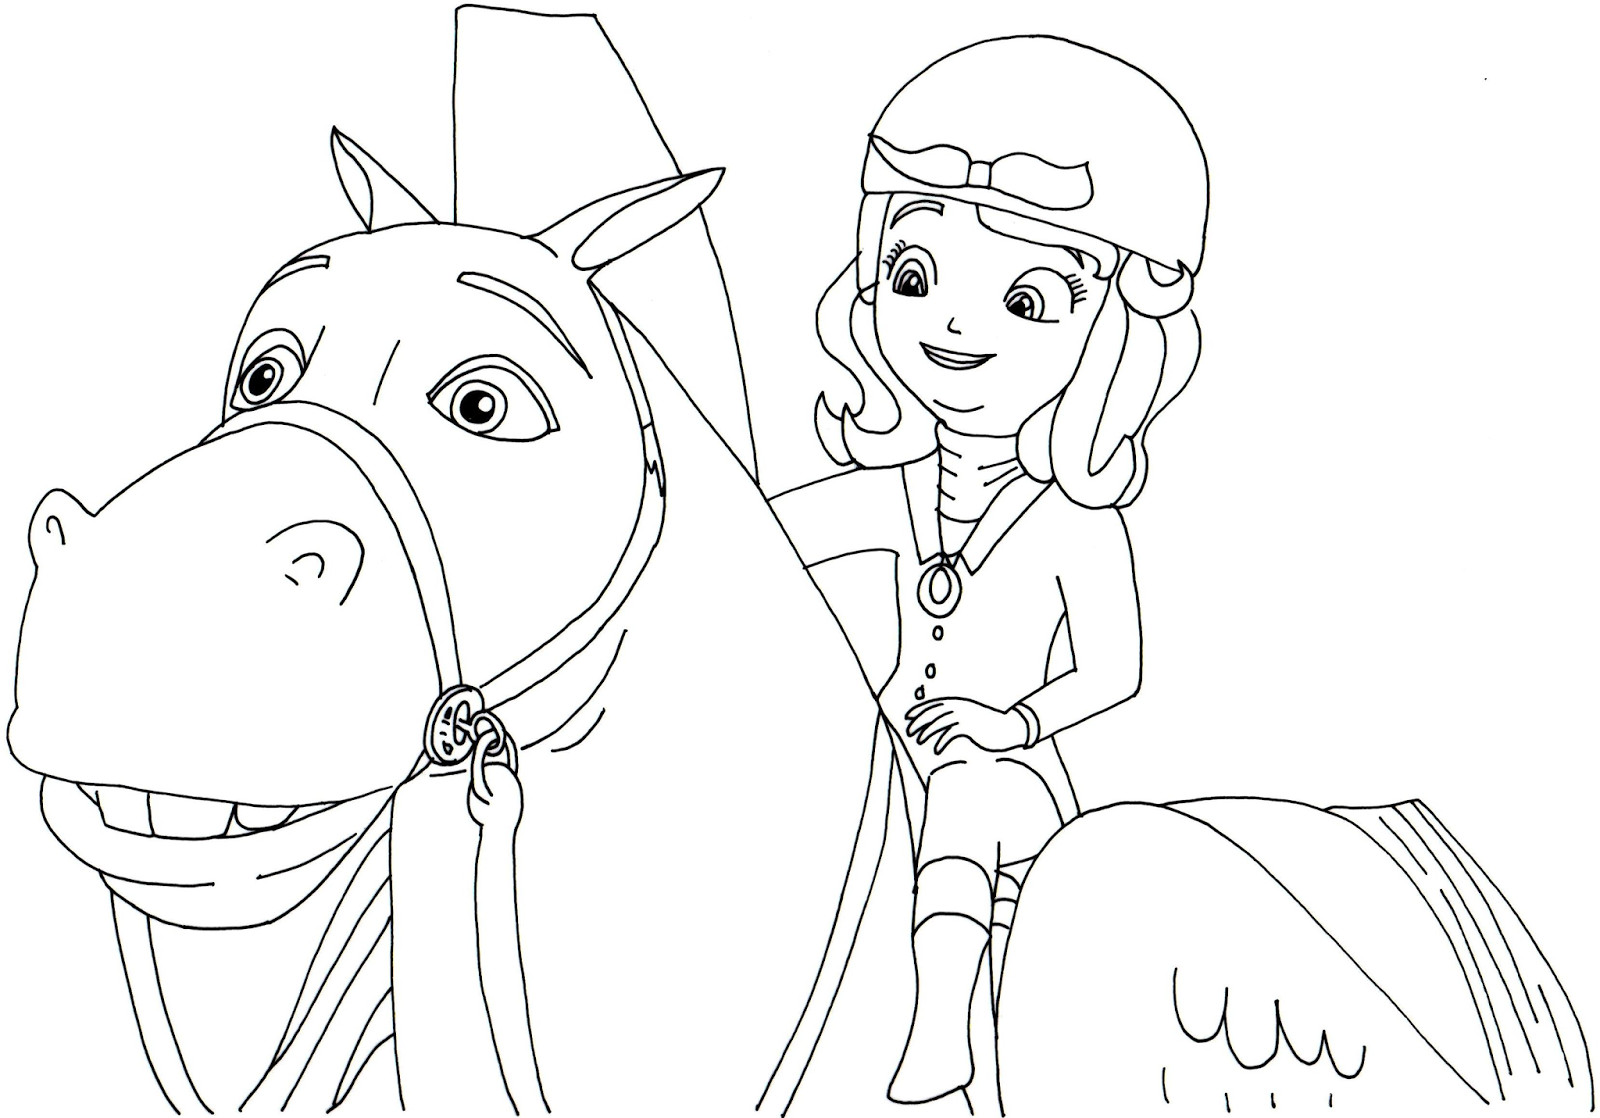 Sofia The First Printable Coloring Pages
 Sofia The First Coloring Pages Minimus and Sofia the